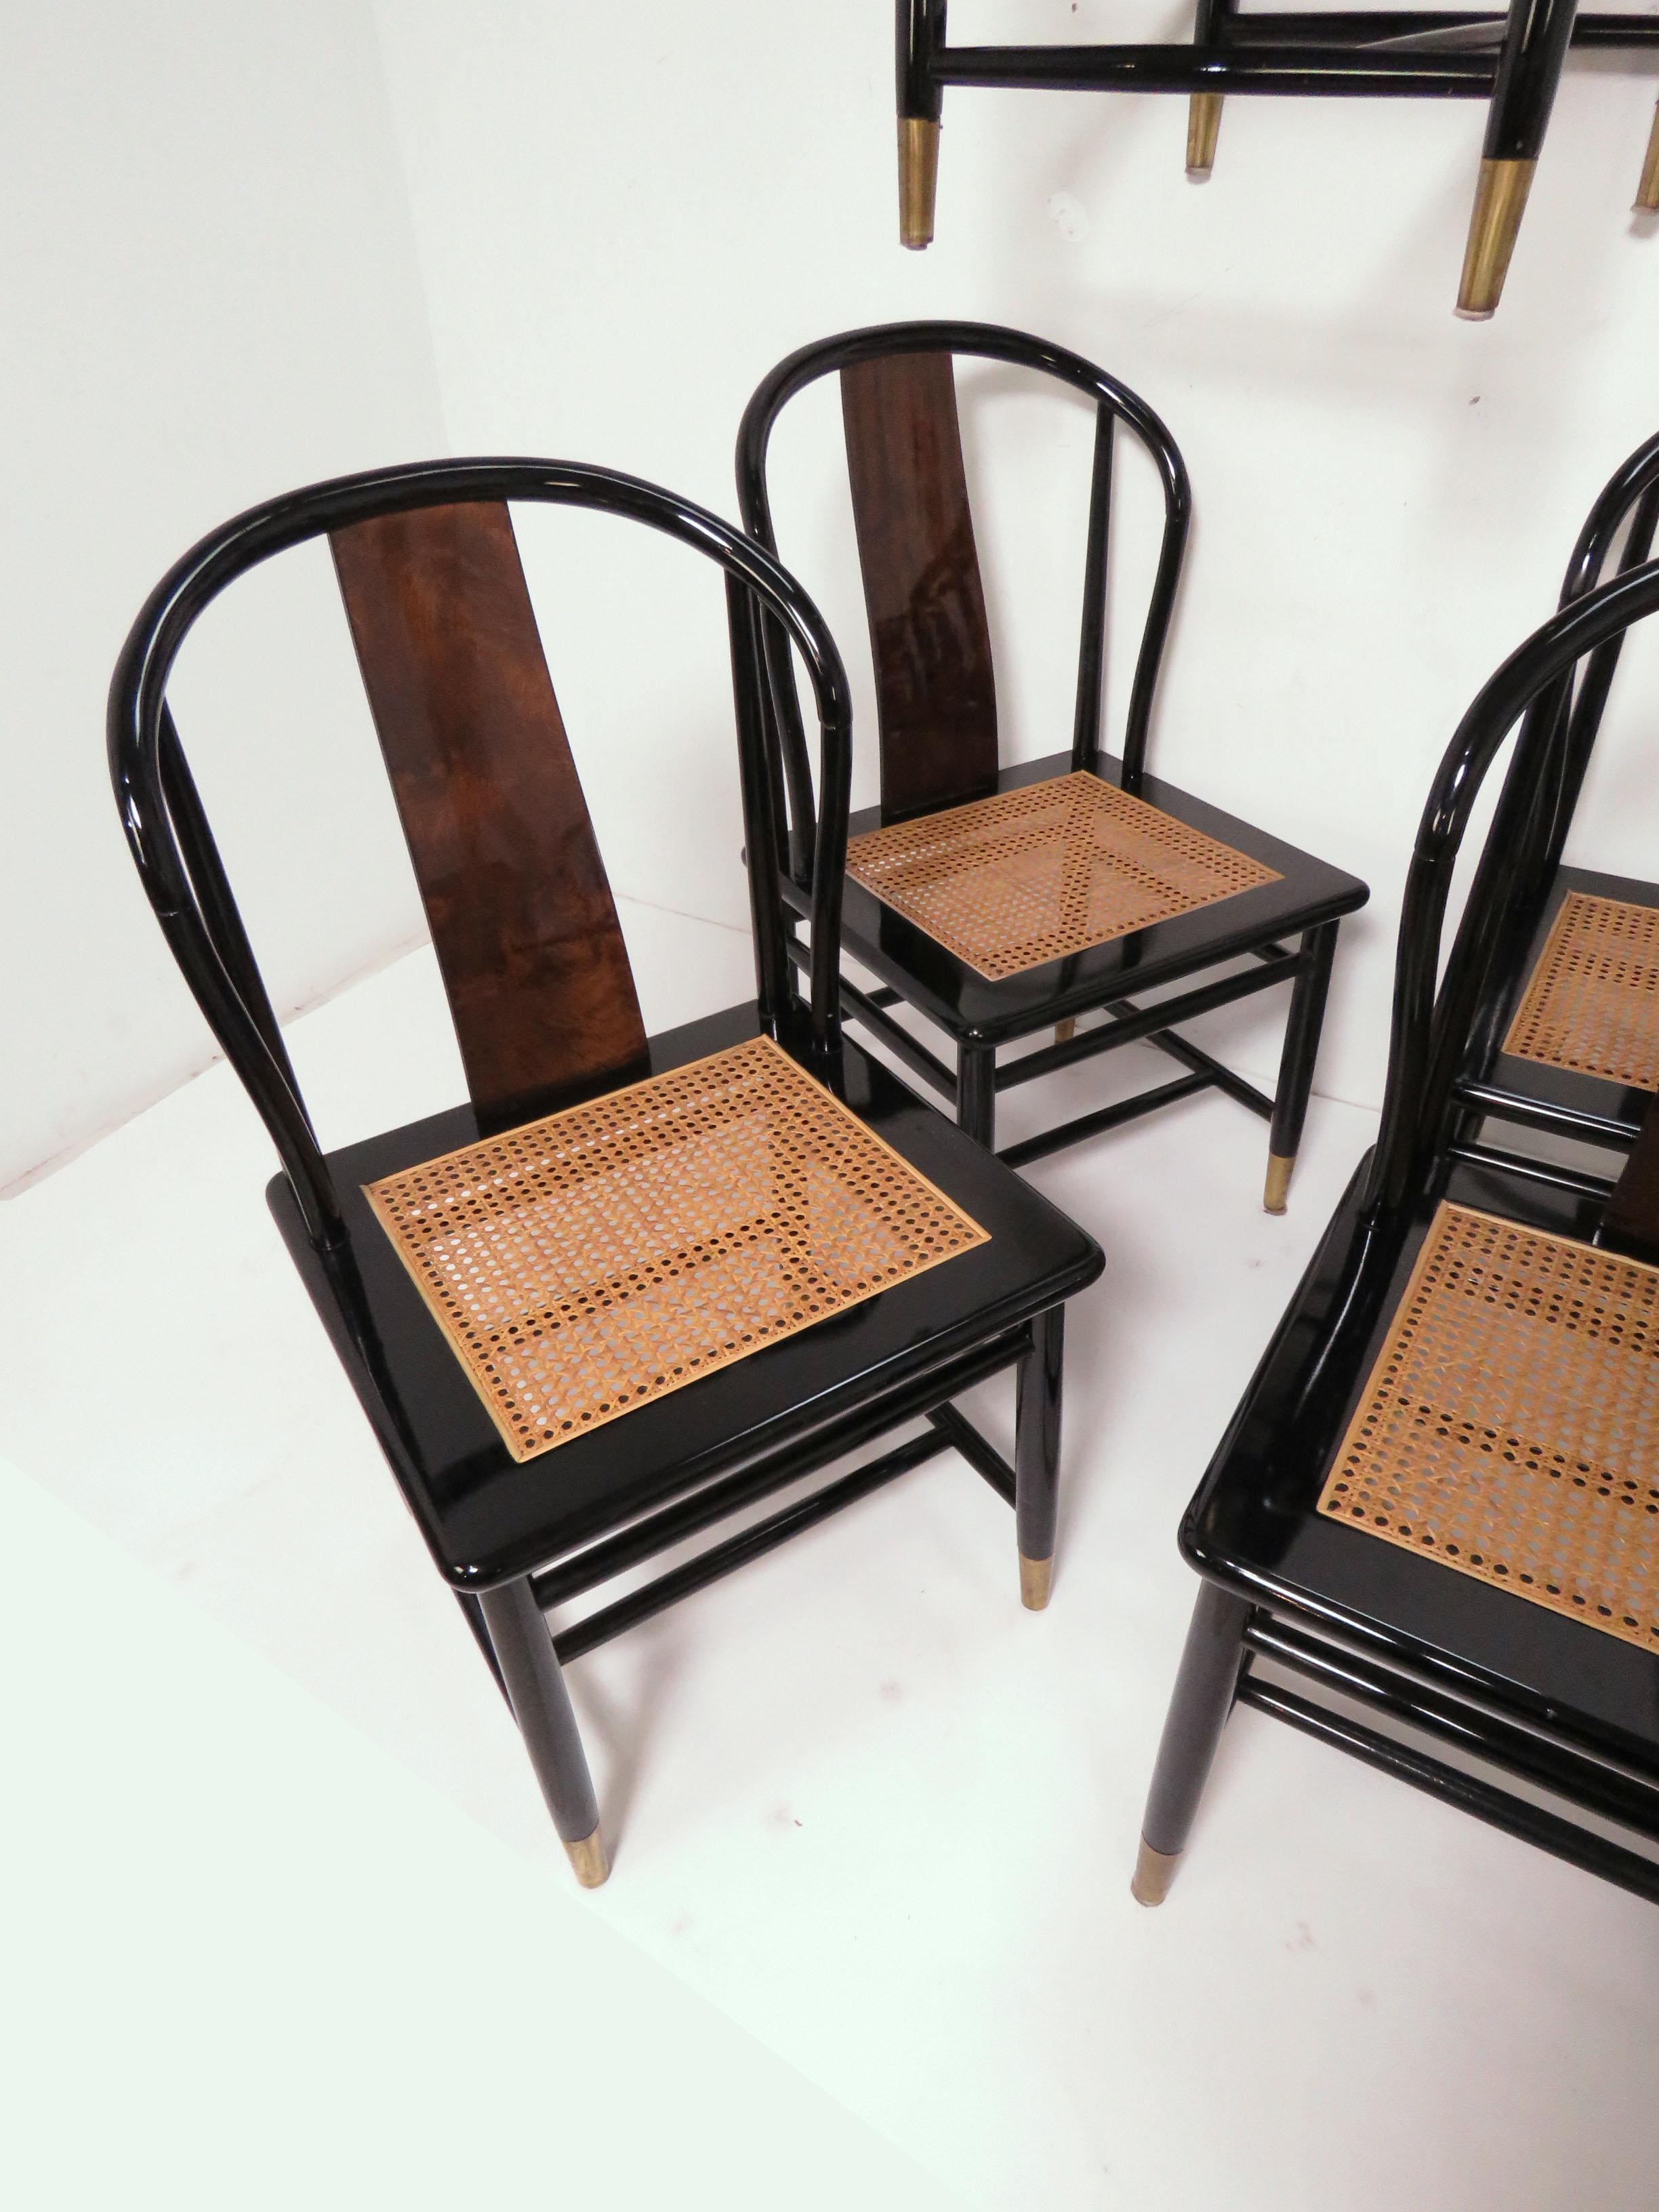 A set of eight dining chairs, consisting of six side chairs and two armchairs from Henredon’s Scene III Collection, circa 1980s. In black lacquer with burl walnut back accents, caned seat panels and brass ferrules, these were a modernist